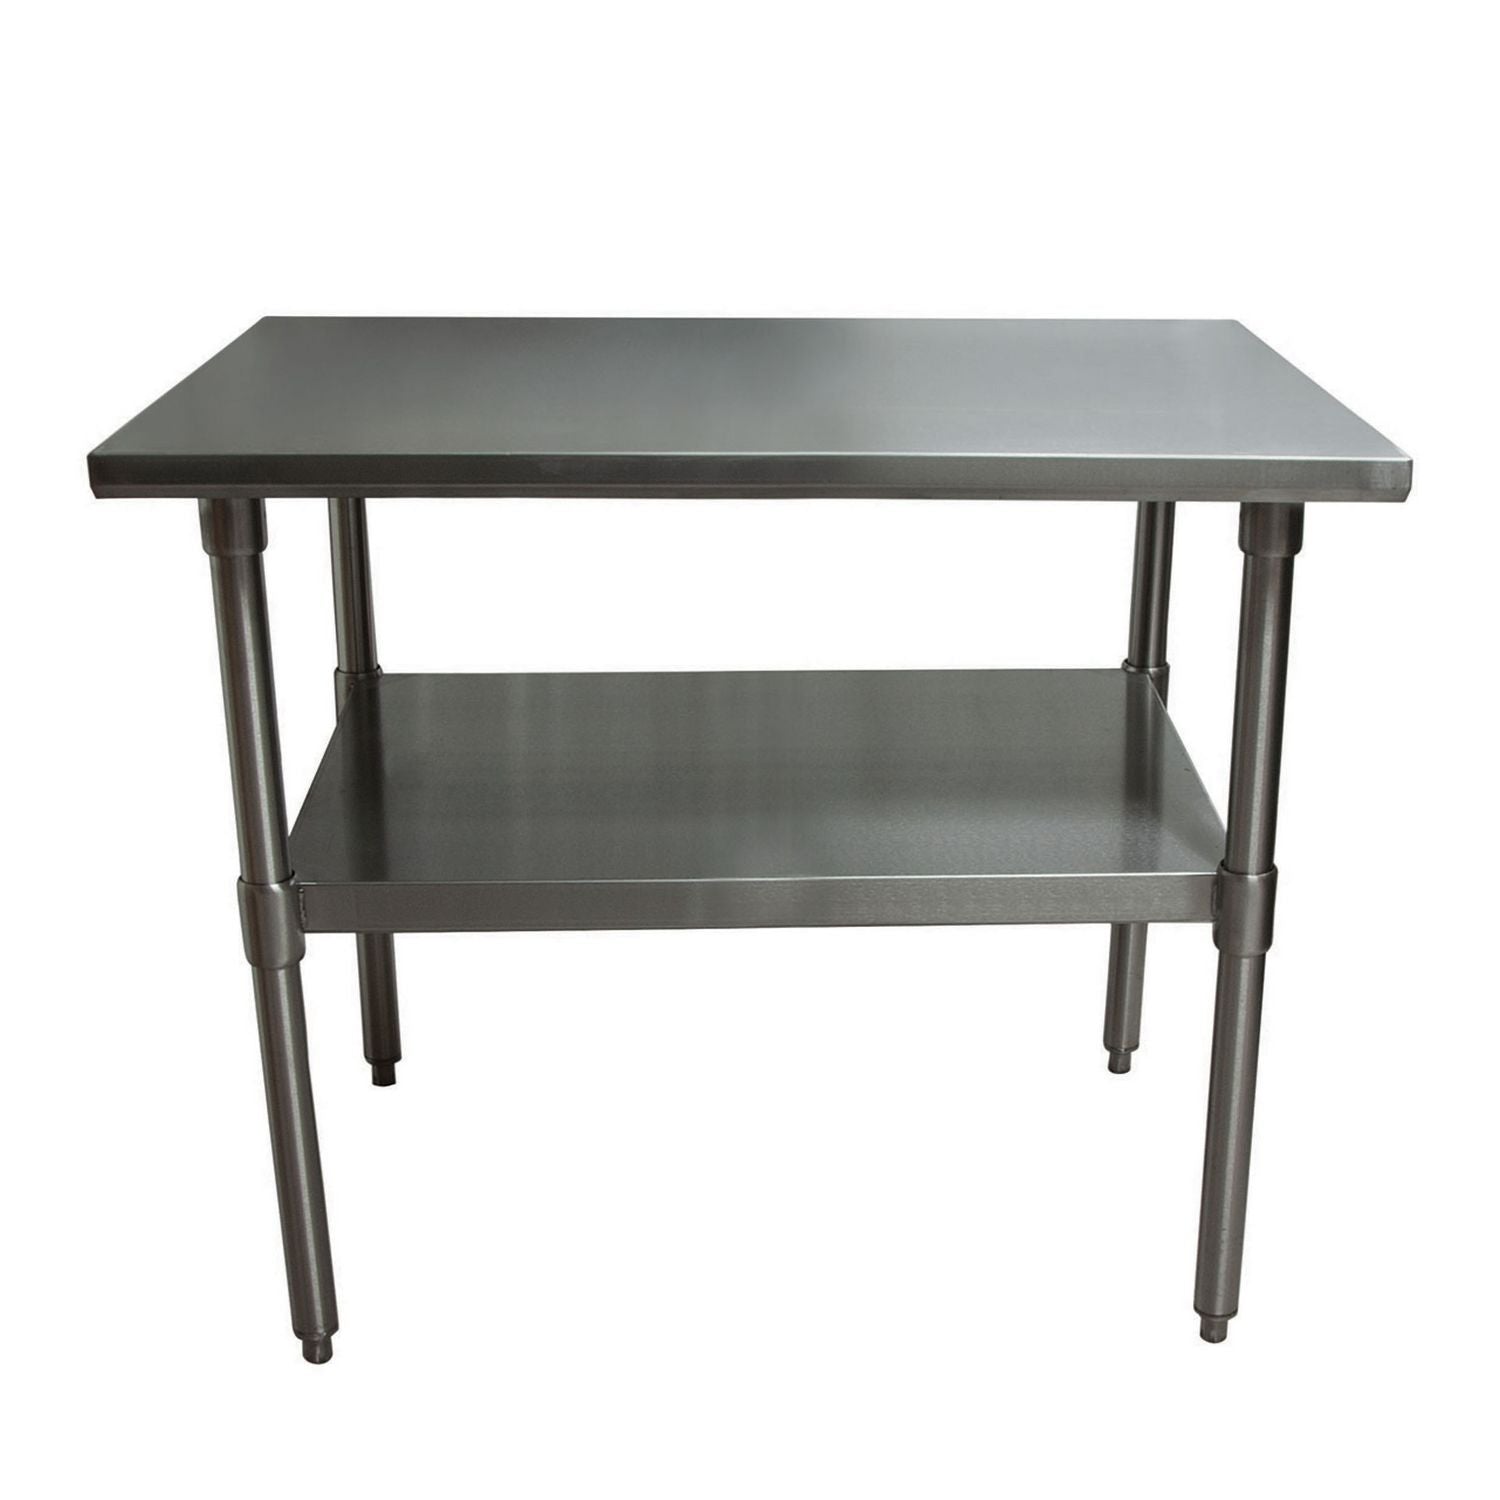 Stainless Steel Flat Top Work Tables, 48w x 24d x 36h, Silver, 2/Pallet, Ships in 4-6 Business Days - 7